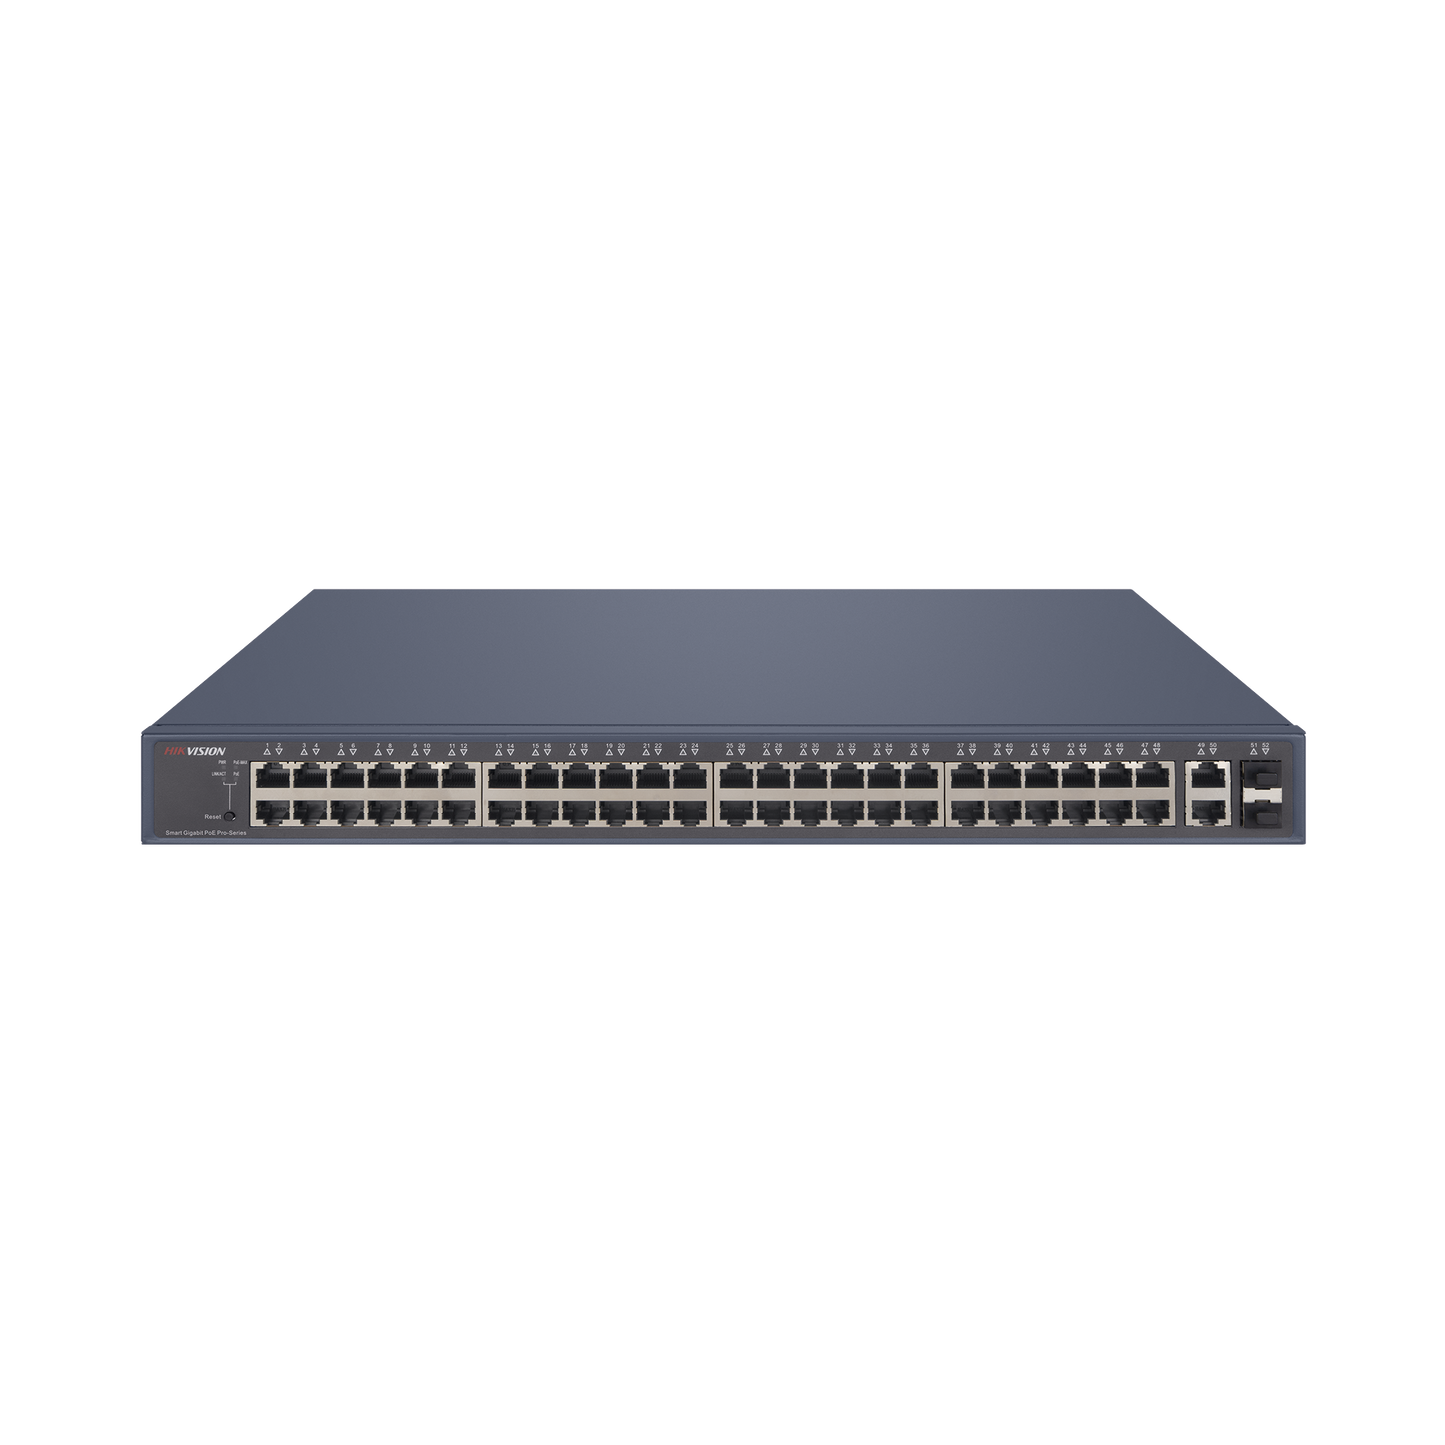 Switch PoE+ / Monitoreable / 48 Puertos 10/100/1000 Mbps PoE+ / 2 Puertos 10/100/1000 Mbps Uplink / 2 Puertos SFP / 470 Watts Totales